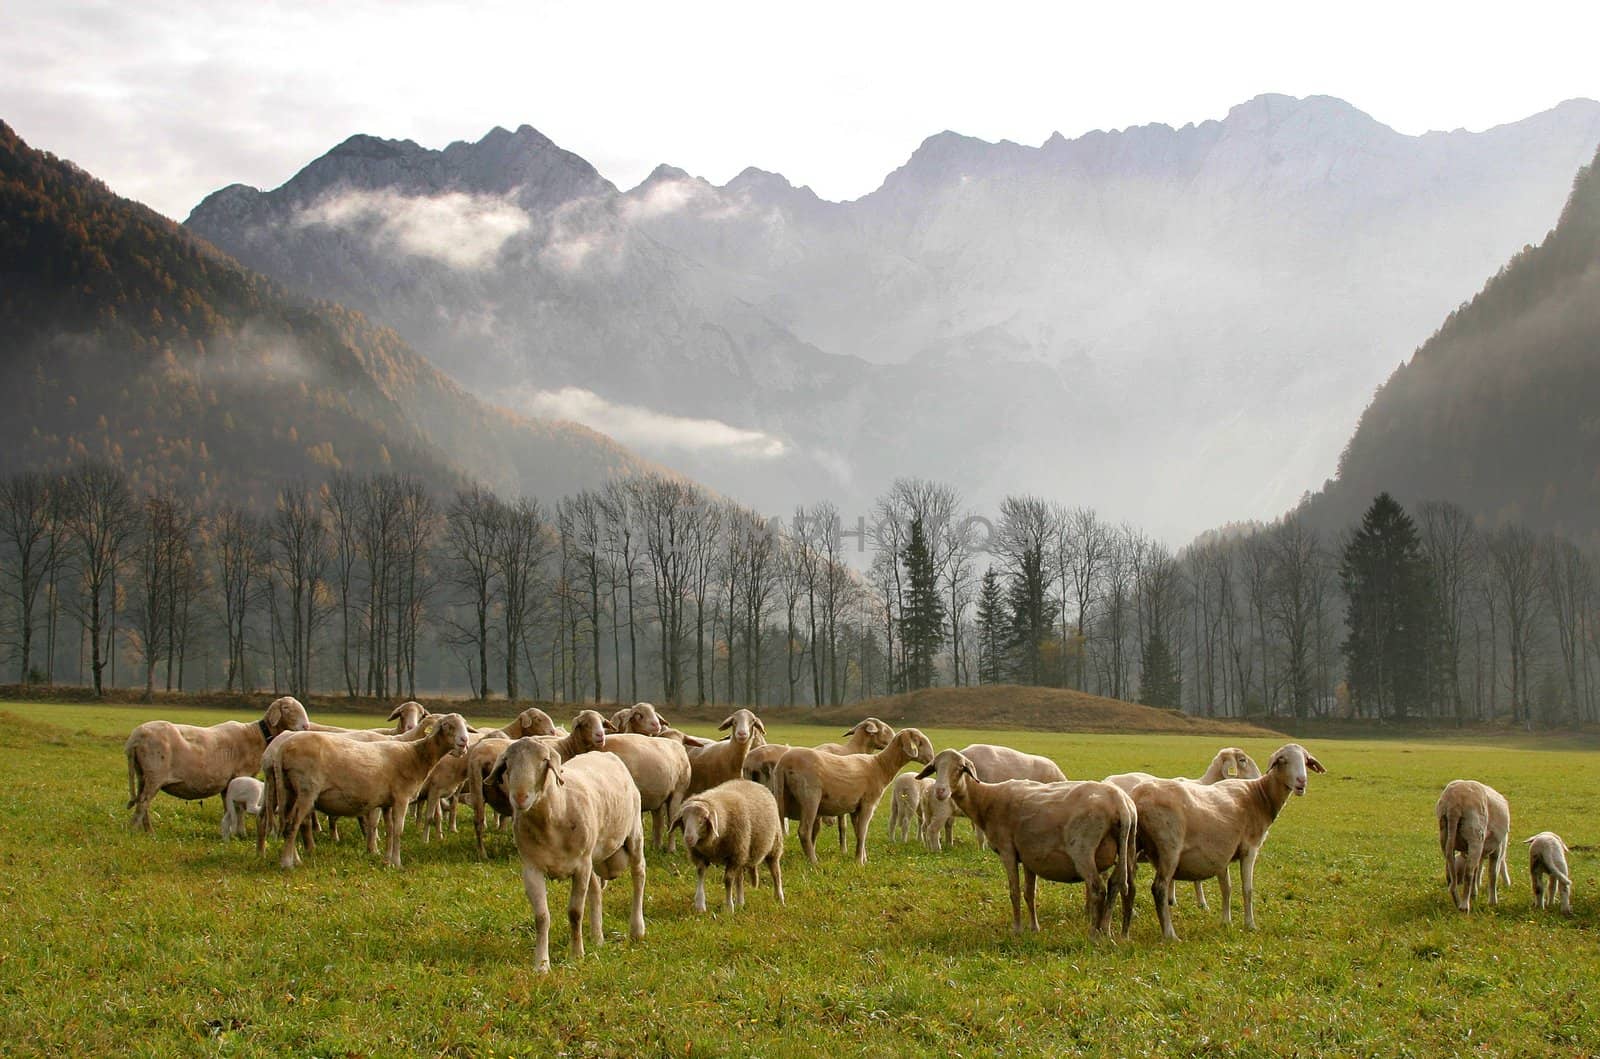 A herd of sheep by Marko5